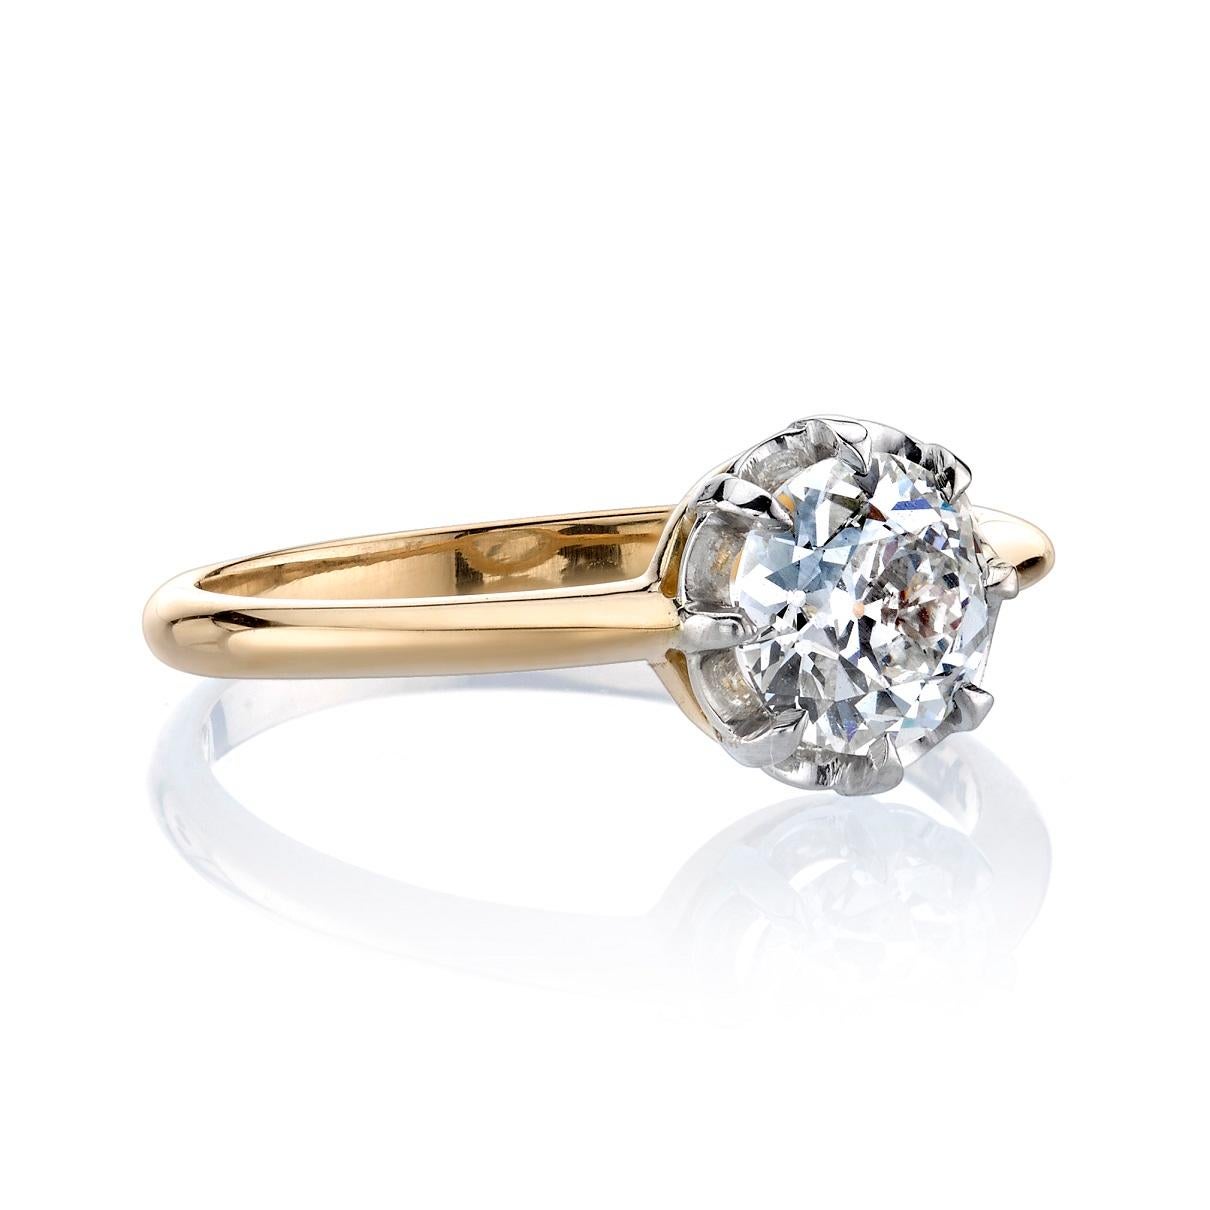 0.95ct I/SI2 GIA certified old European cut diamond set in a handcrafted platinum and 18K yellow gold mounting. Ring is currently a size 6 and can be sized to fit. 